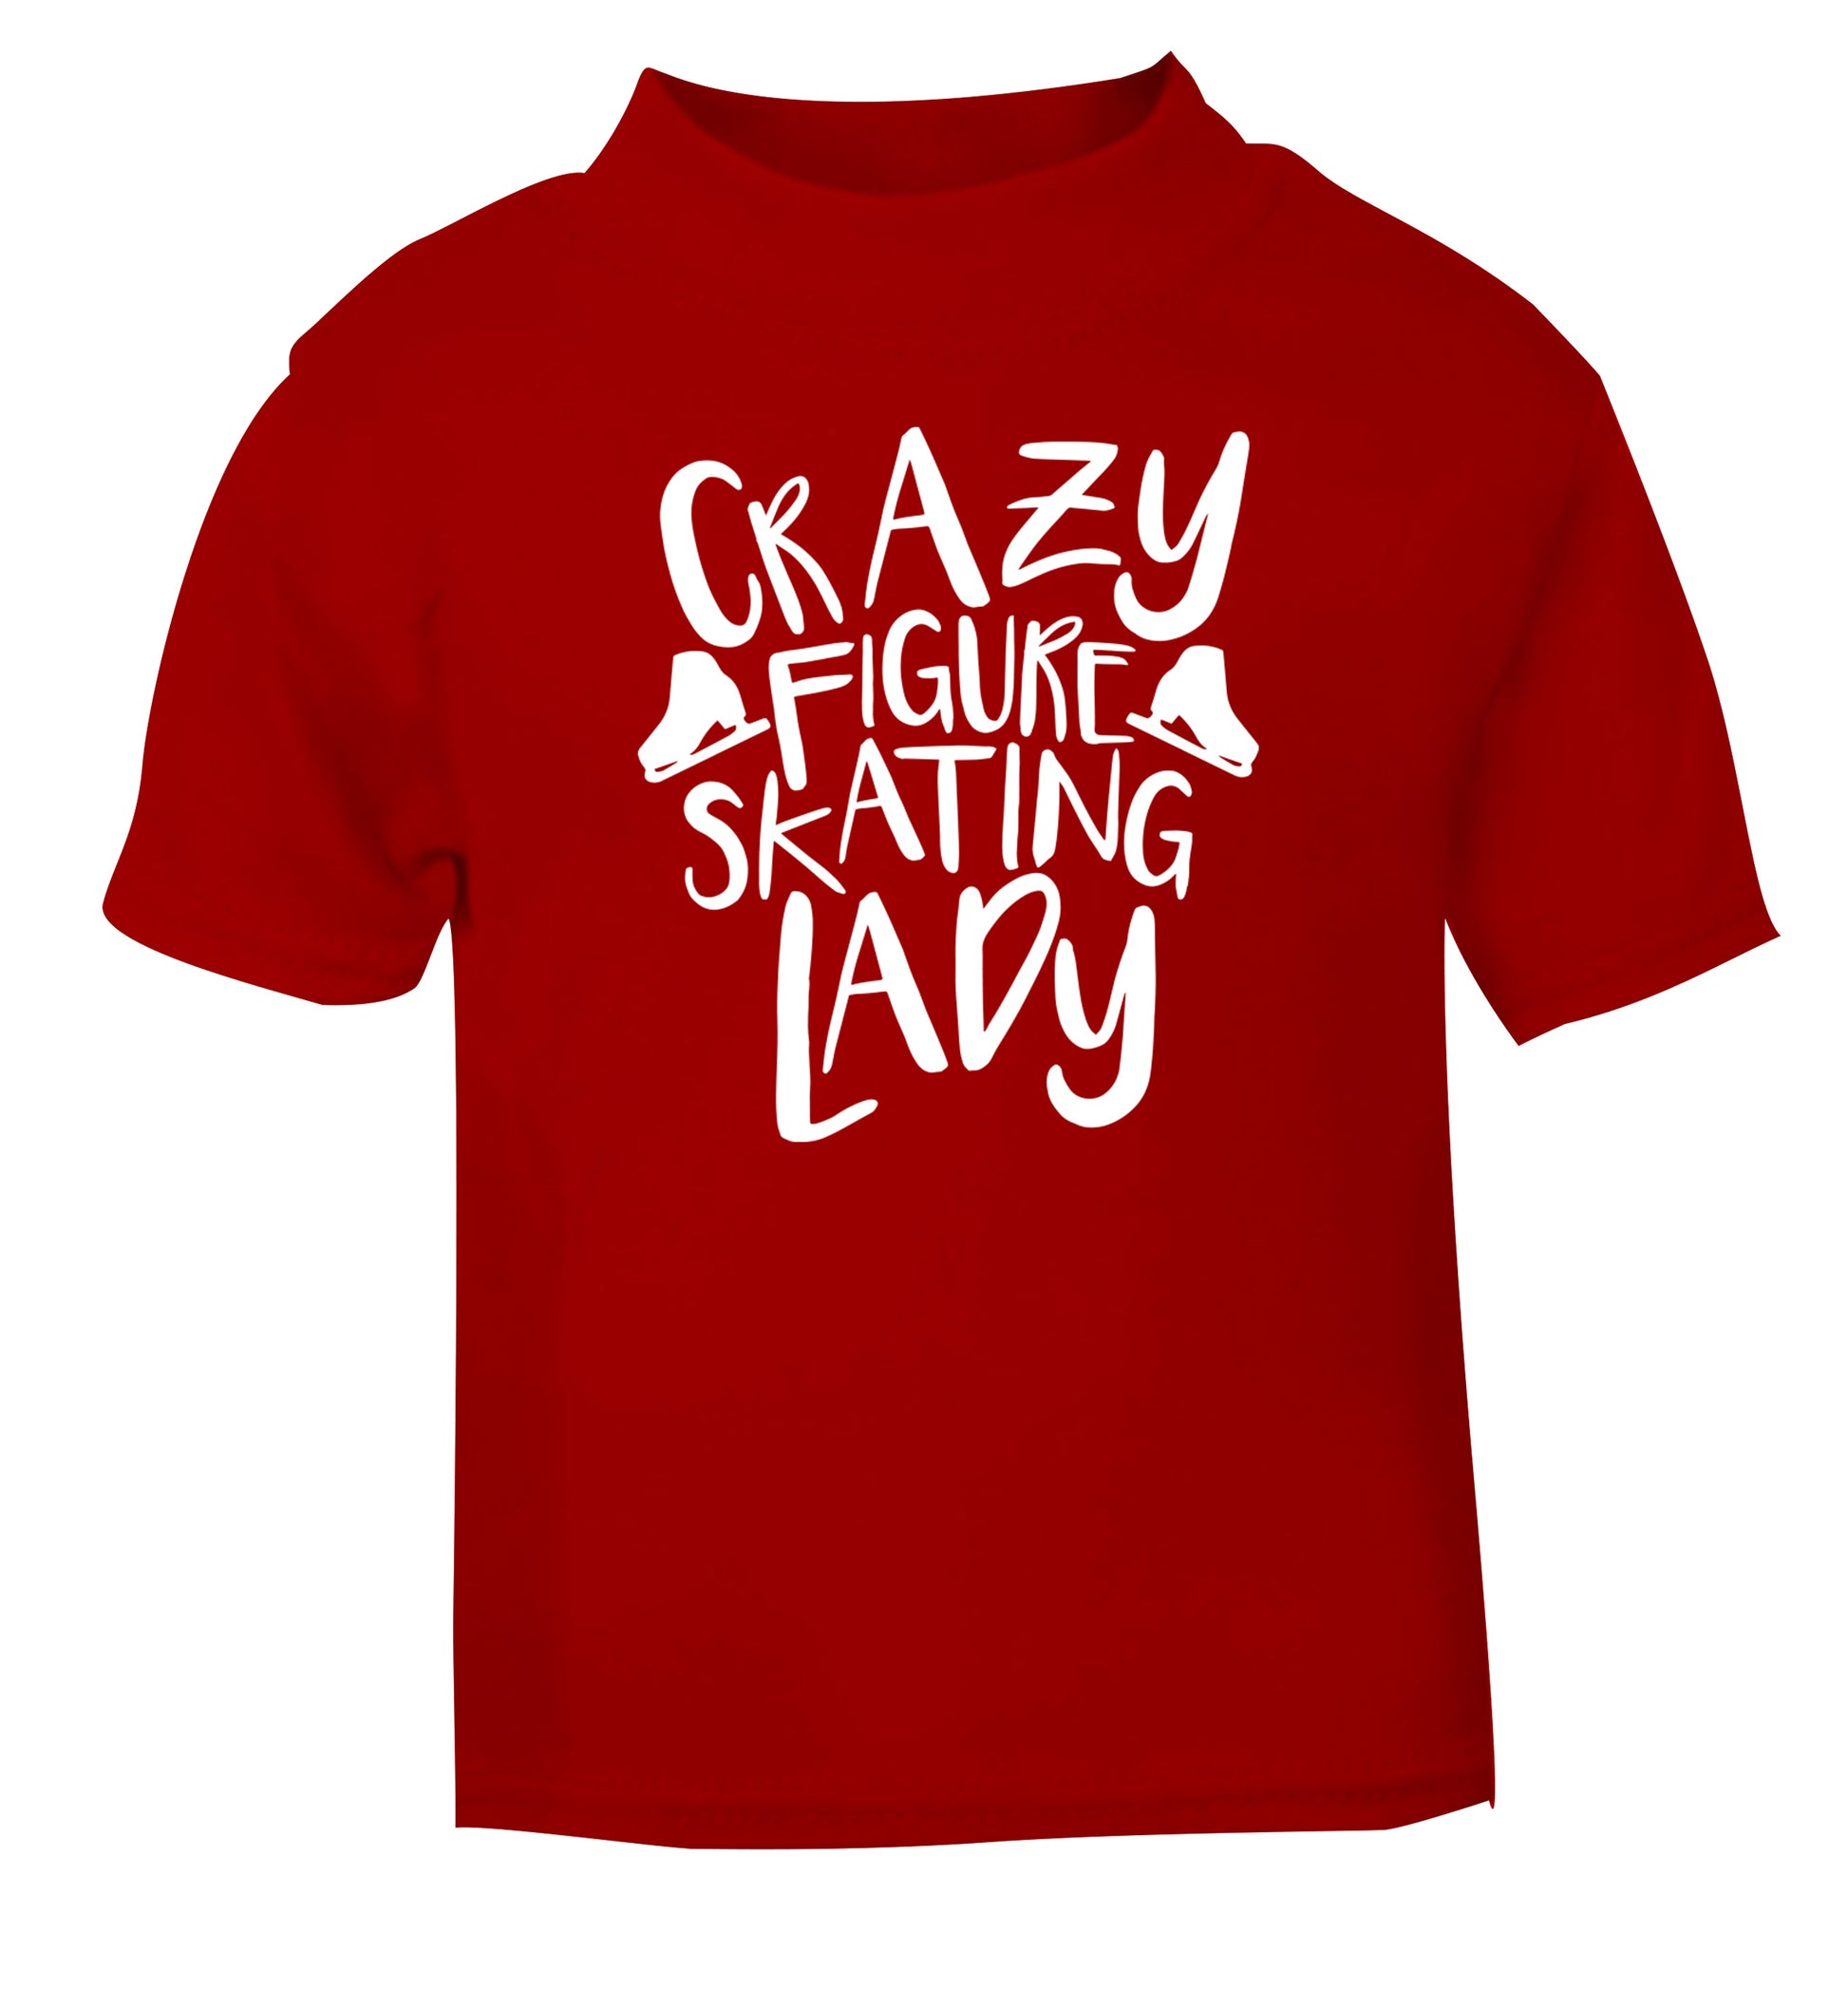 Crazy figure skating lady red Baby Toddler Tshirt 2 Years